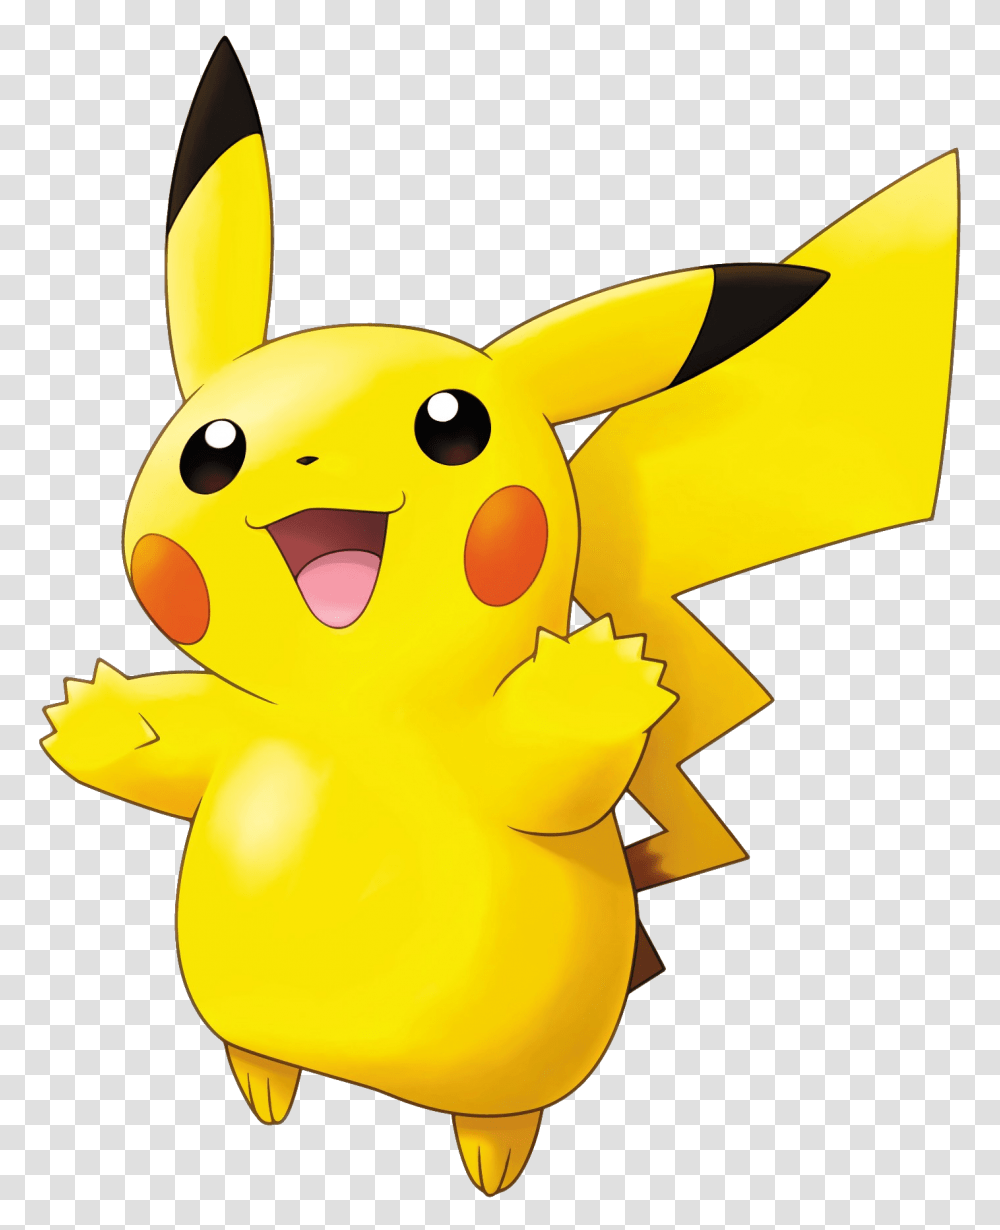 Download Free Pikachu Backgroundpokemontransparent Pokemon Characters, Toy, Peeps, Animal Transparent Png